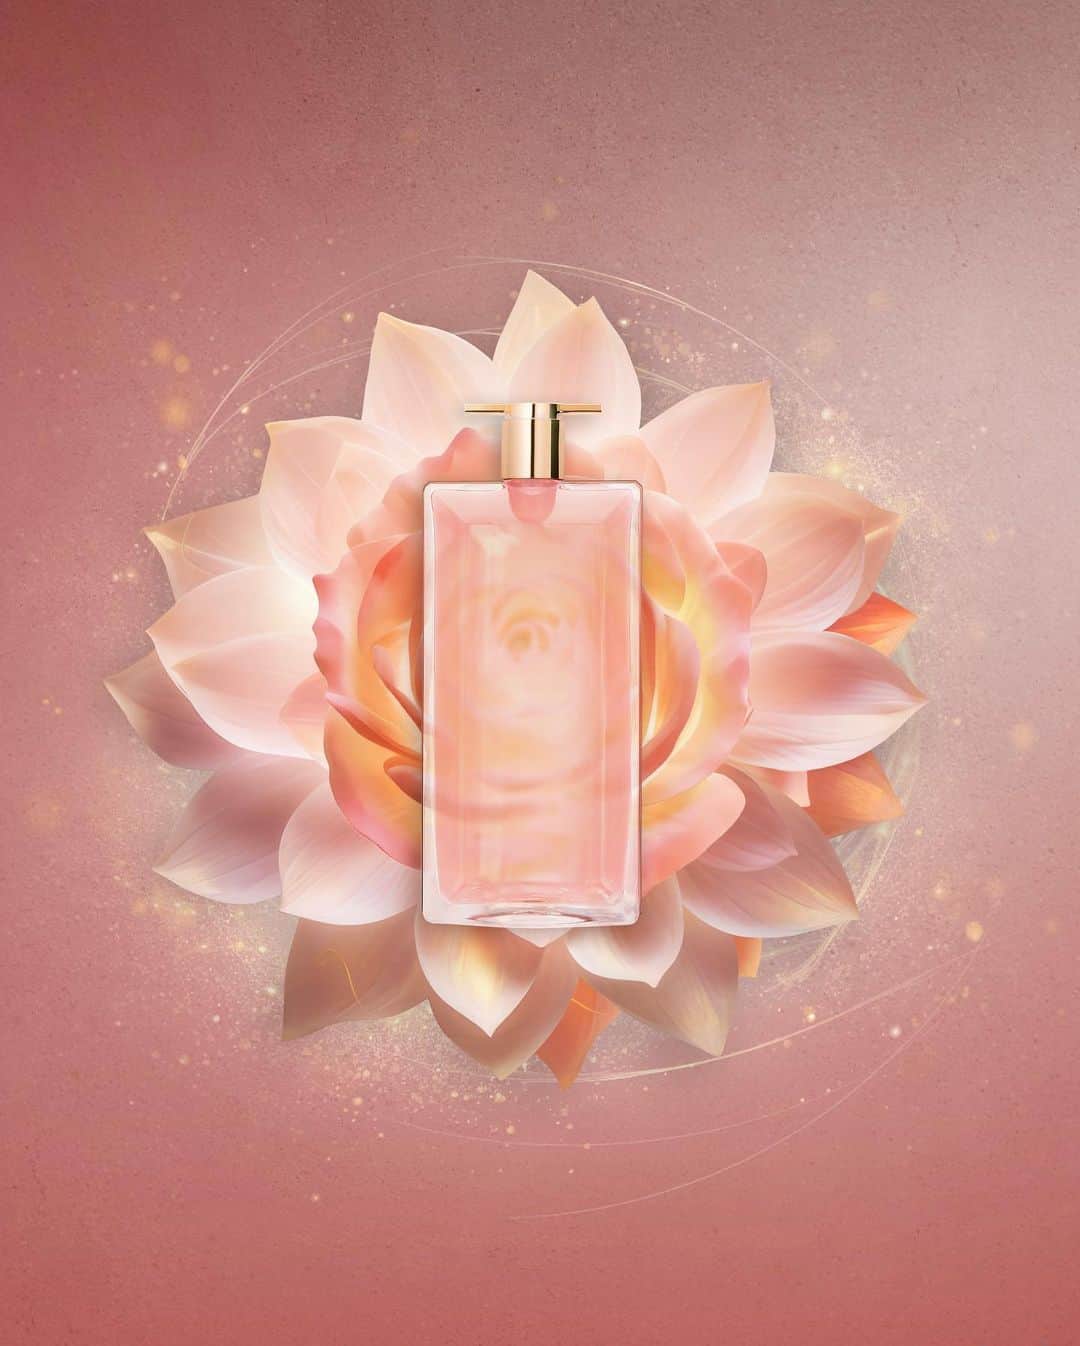 Lancôme Officialのインスタグラム：「Light, happiness, beauty and abundance. Together with Lancôme, embrace Diwali’s luminous spirit as our iconic rose becomes a blooming lotus, symbol of beauty and renewal, crafted with the help of AI, seamlessly blending technology and tradition. Lancôme wishes you a Diwali filled with the radiant light of happiness and sends its warmest wishes to everyone celebrating around the world.  #Lancome #Diwali」